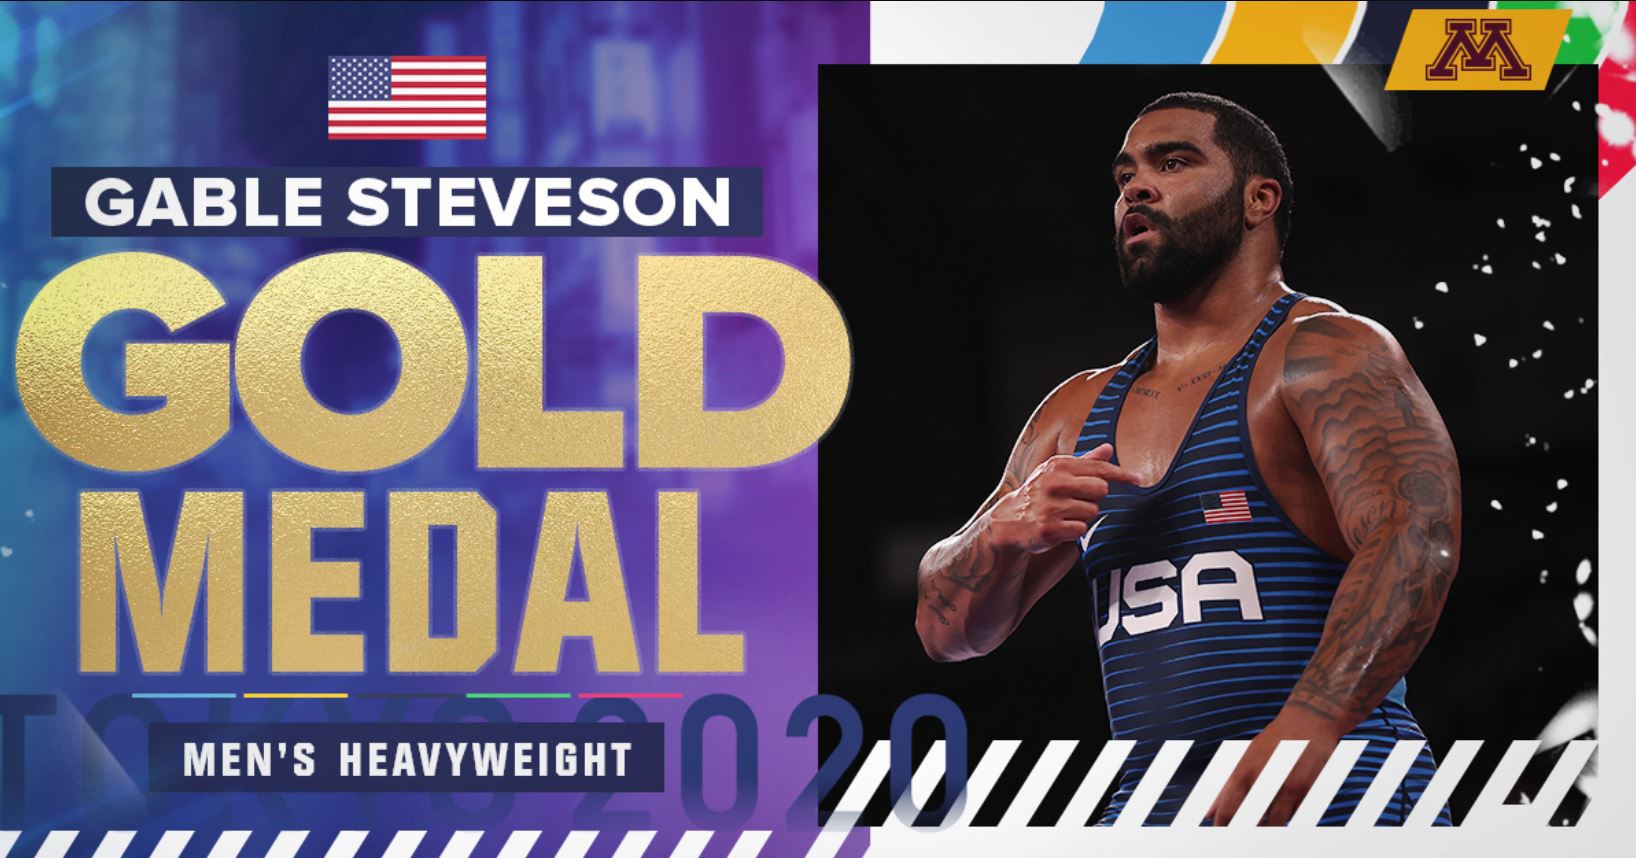 wwe & ufc want olympic gold medalist